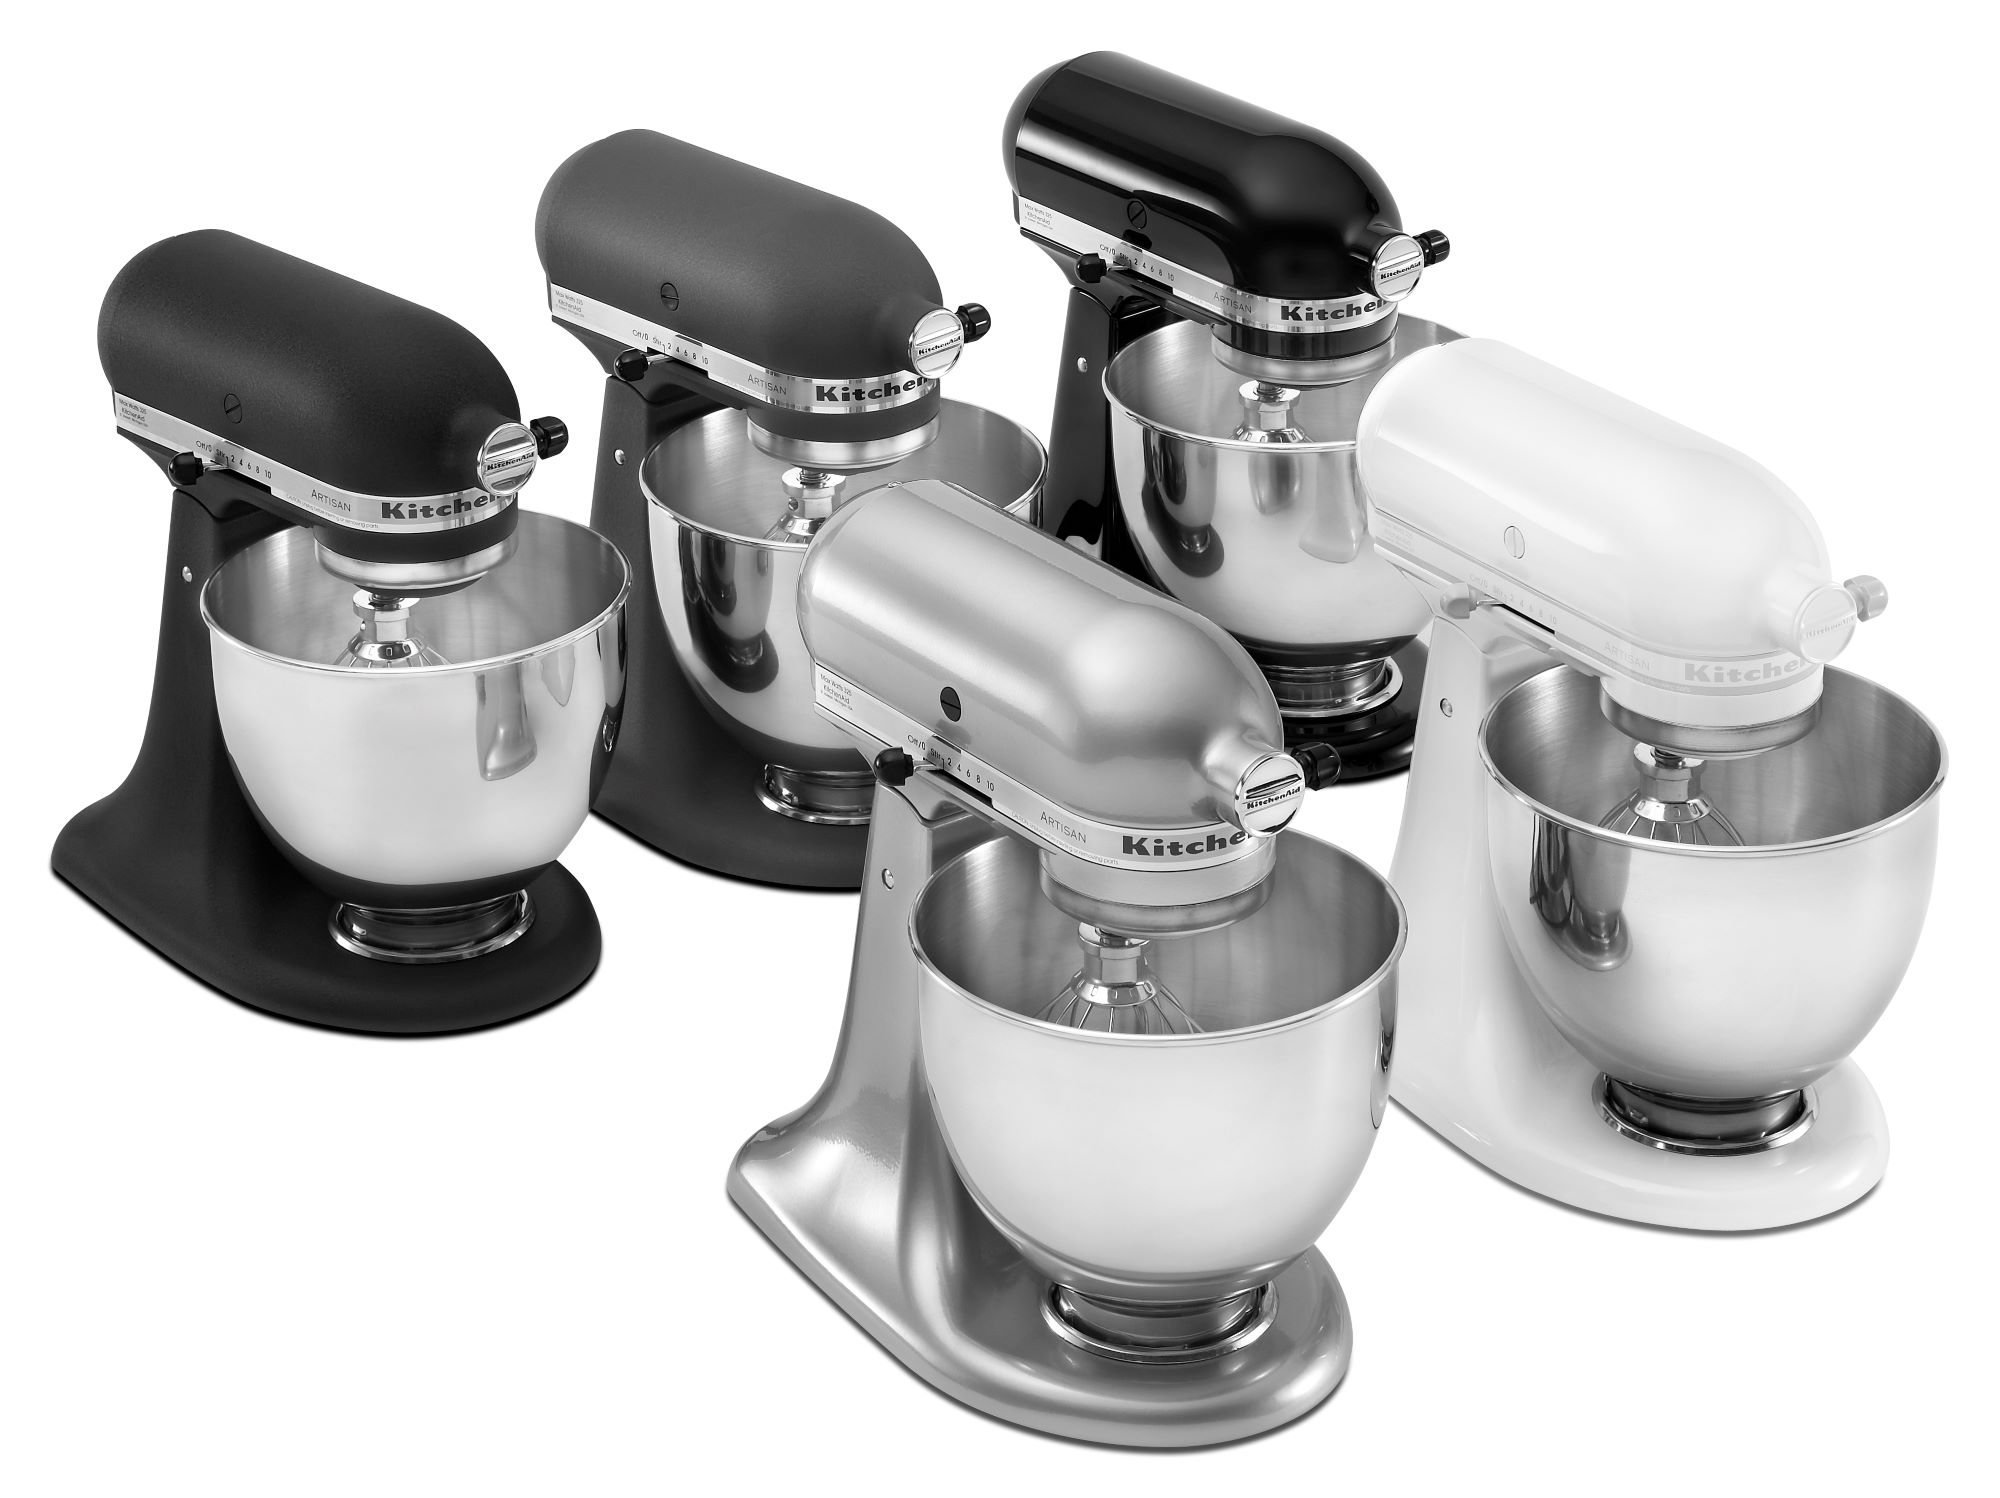 KitchenAid Artisan Imperial the Residential 10-Speed Mixer Series Black Mixers at Stand 5-Quart in department Stand